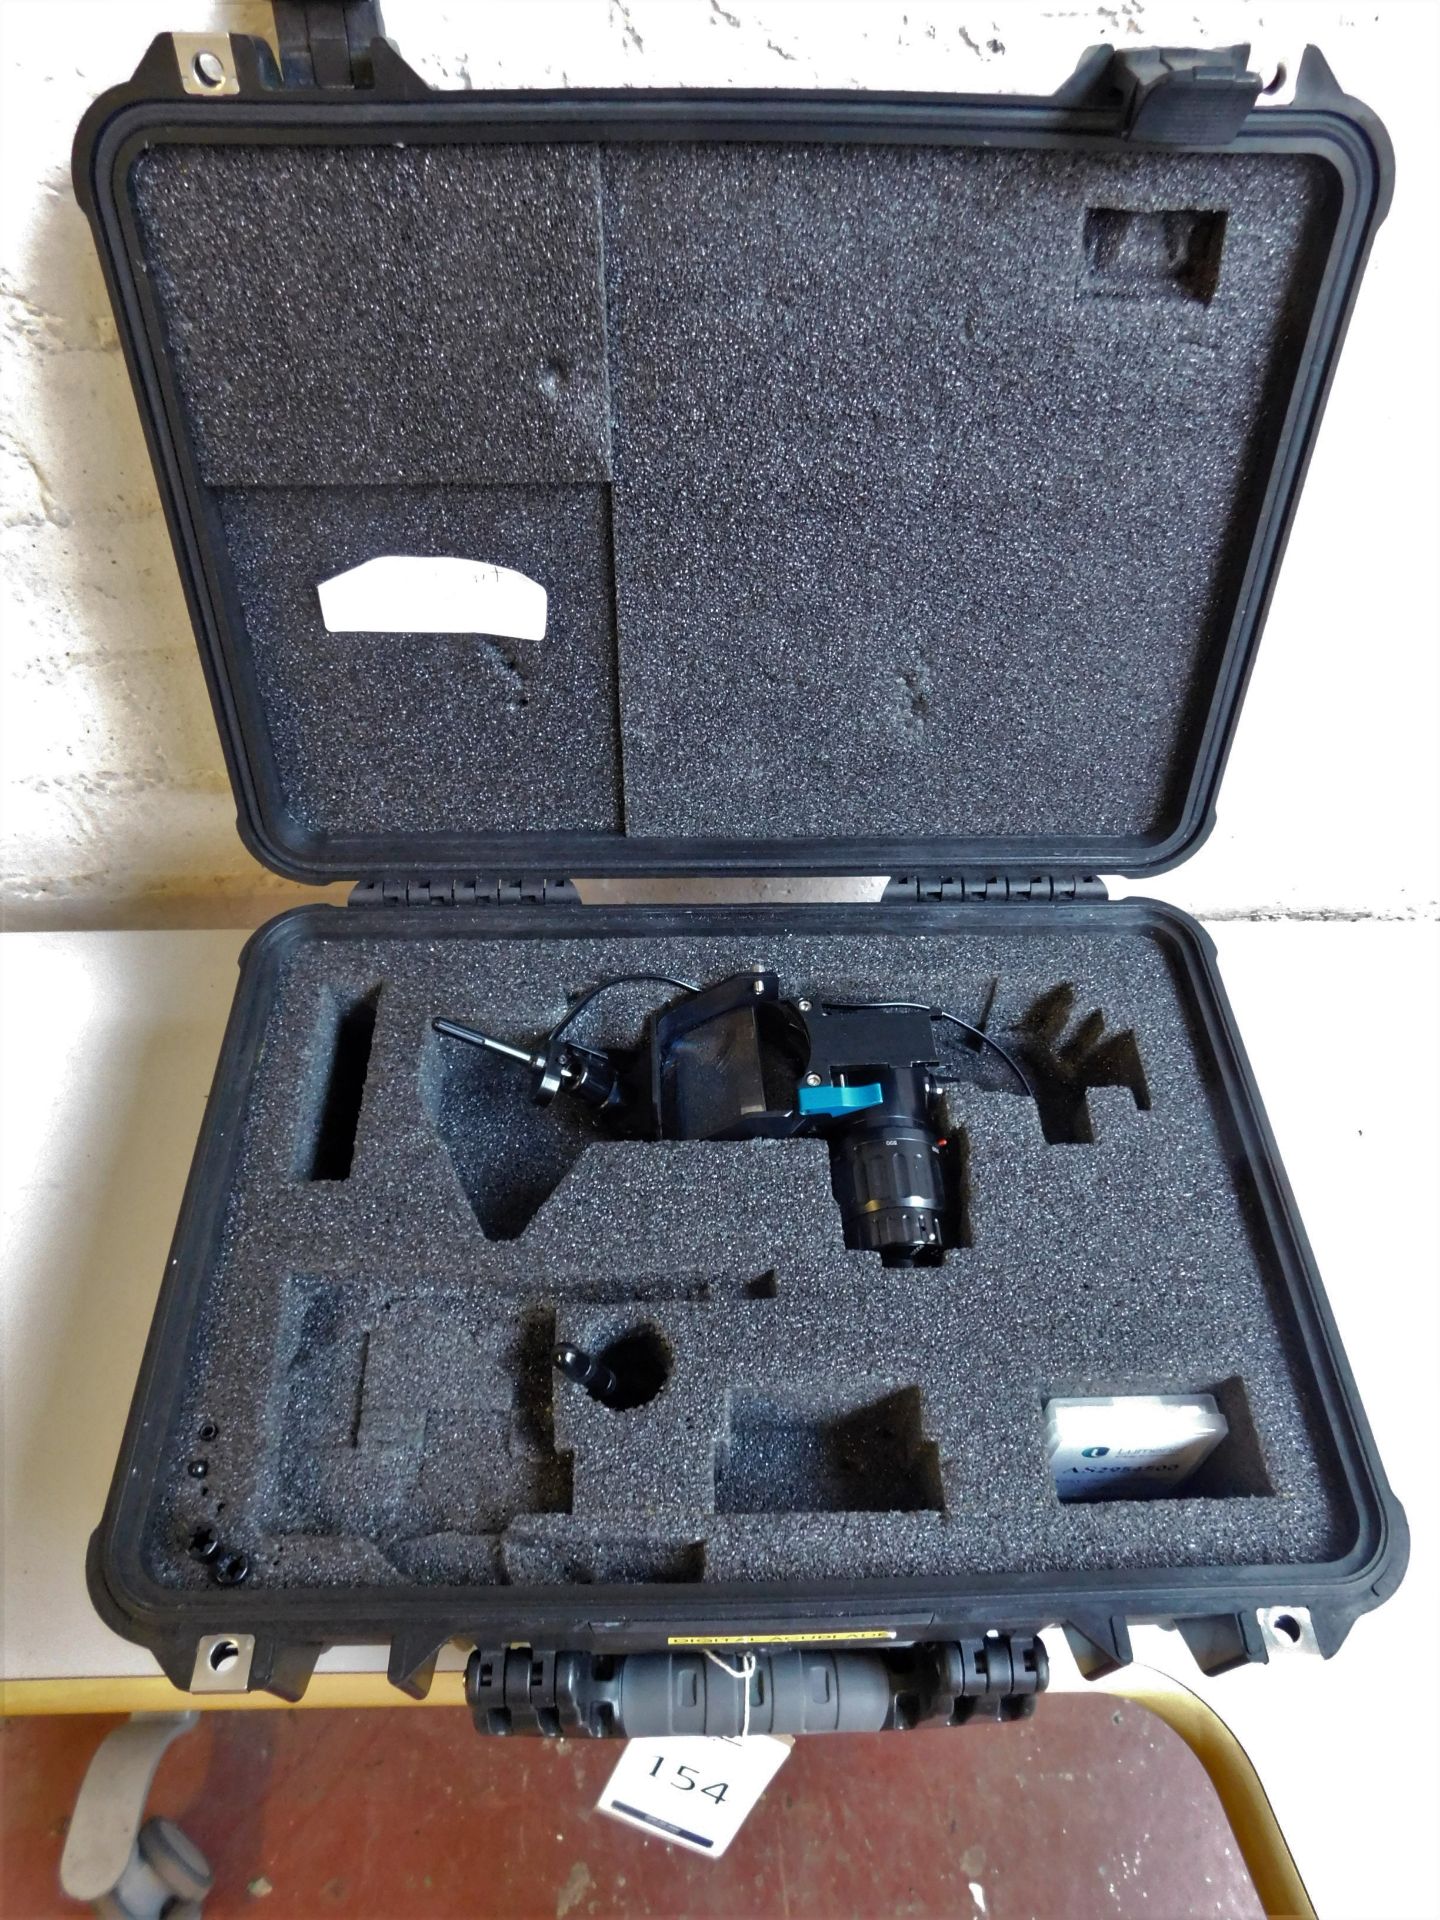 Digital Acublade in Carry Case (Location: Bushey. Please Refer to General Notes)